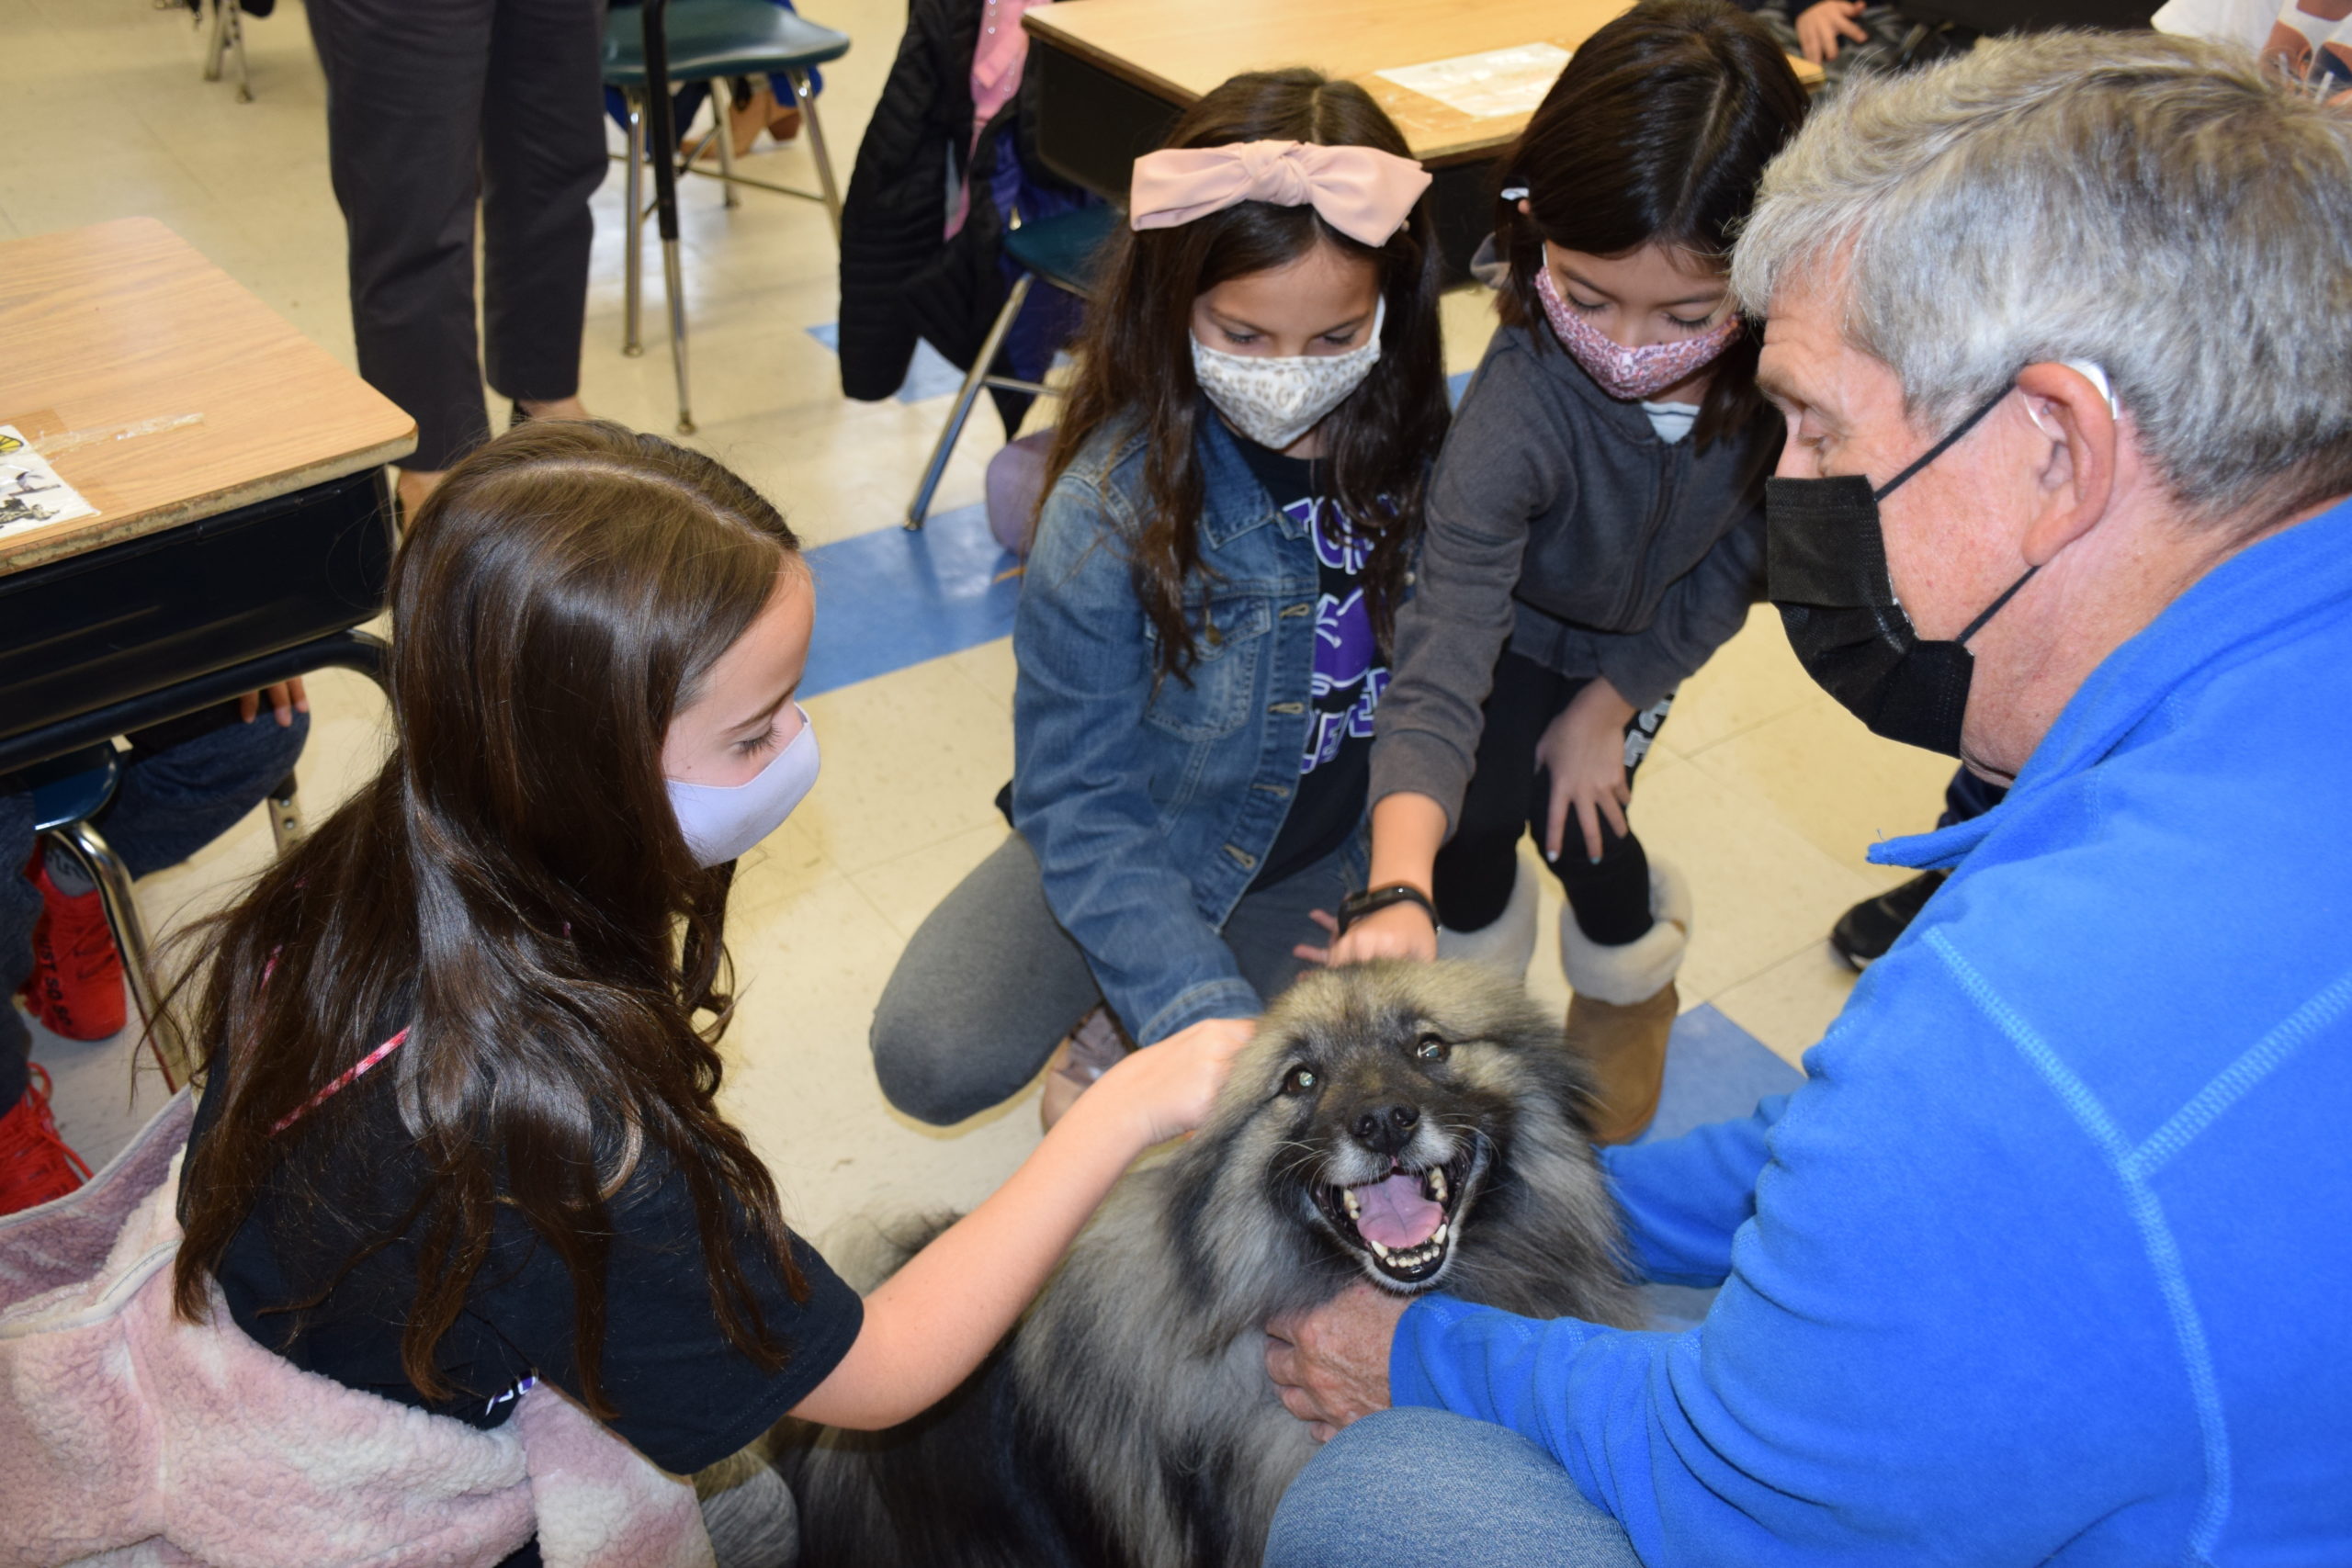 Hampton Bays Elementary School students enjoyed spending time with Ray, a therapy dog from Love on a Leash.